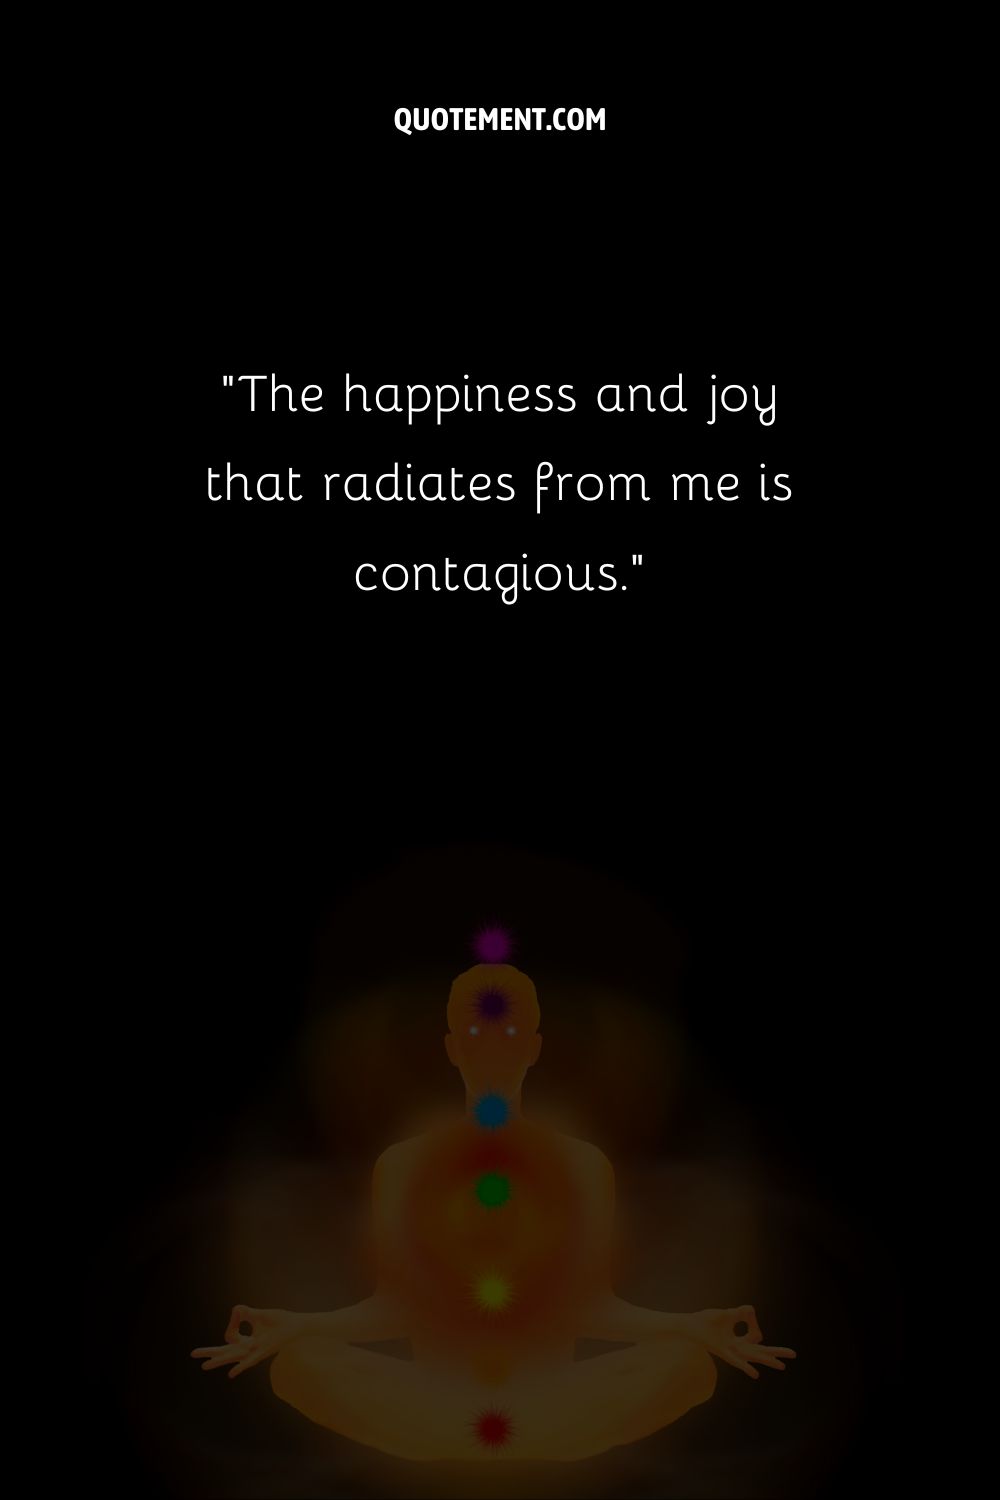 The happiness and joy that radiates from me is contagious.